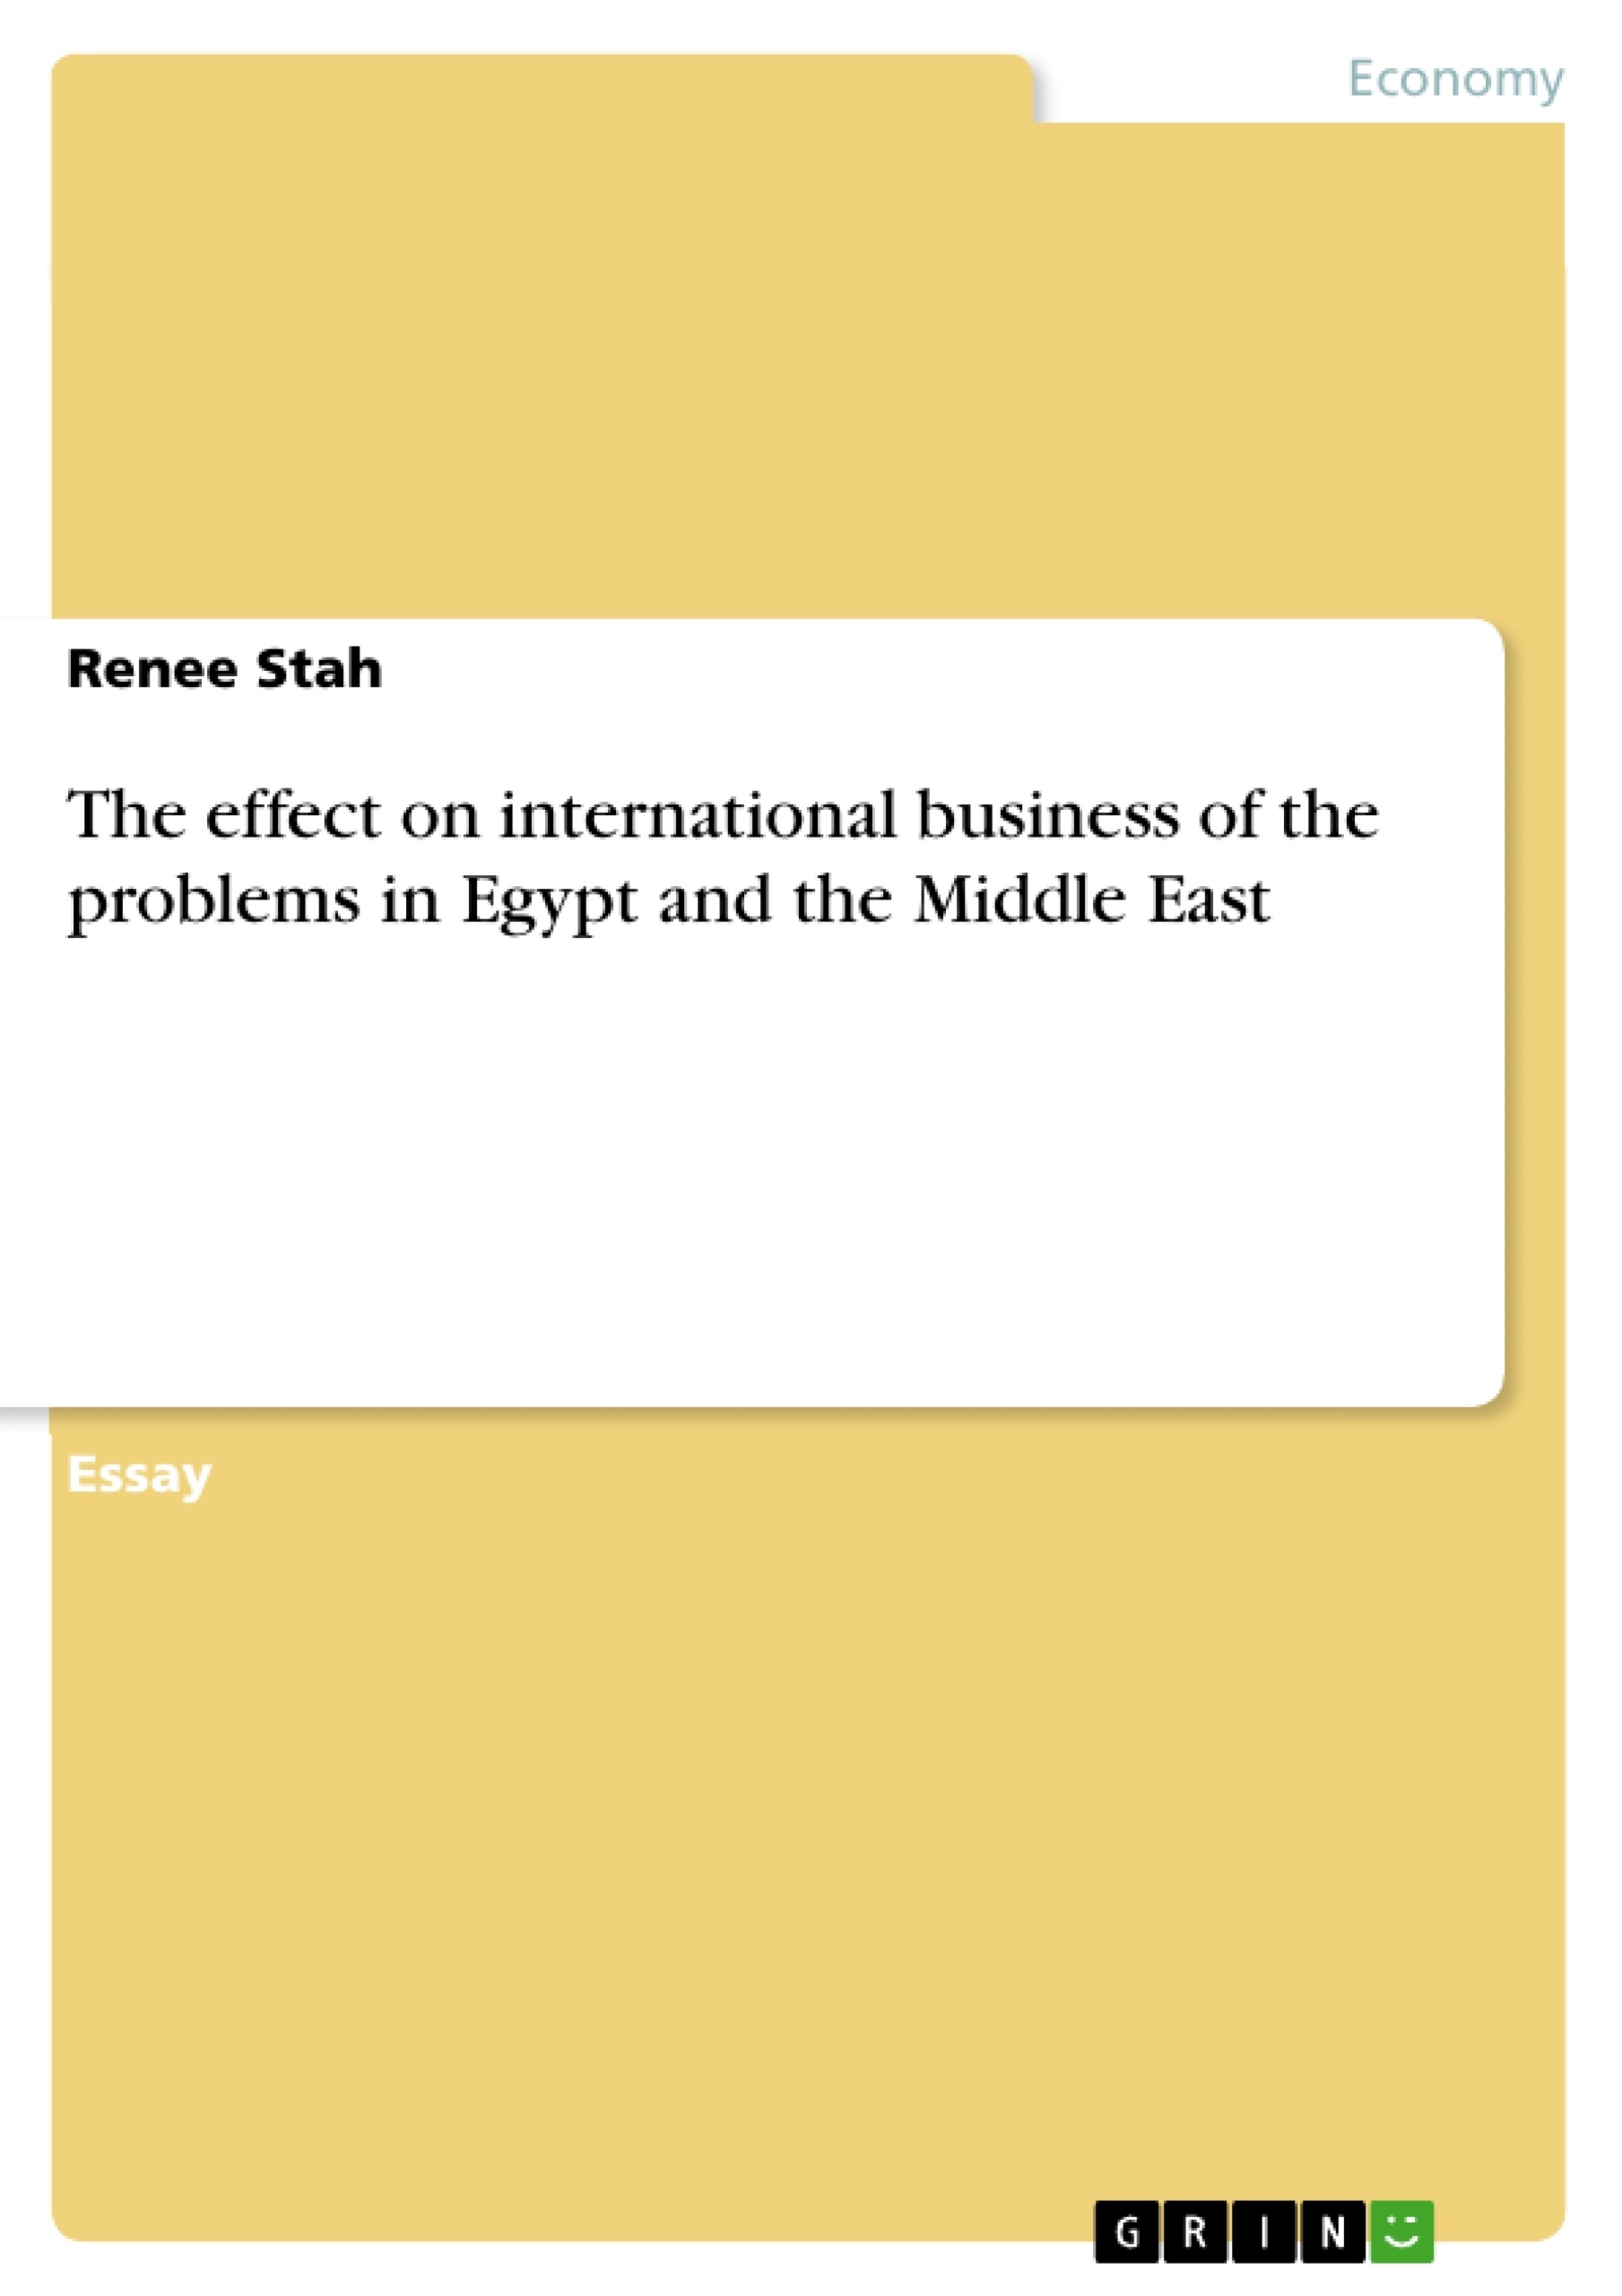 Title: The effect on international business of the problems in Egypt and the Middle East